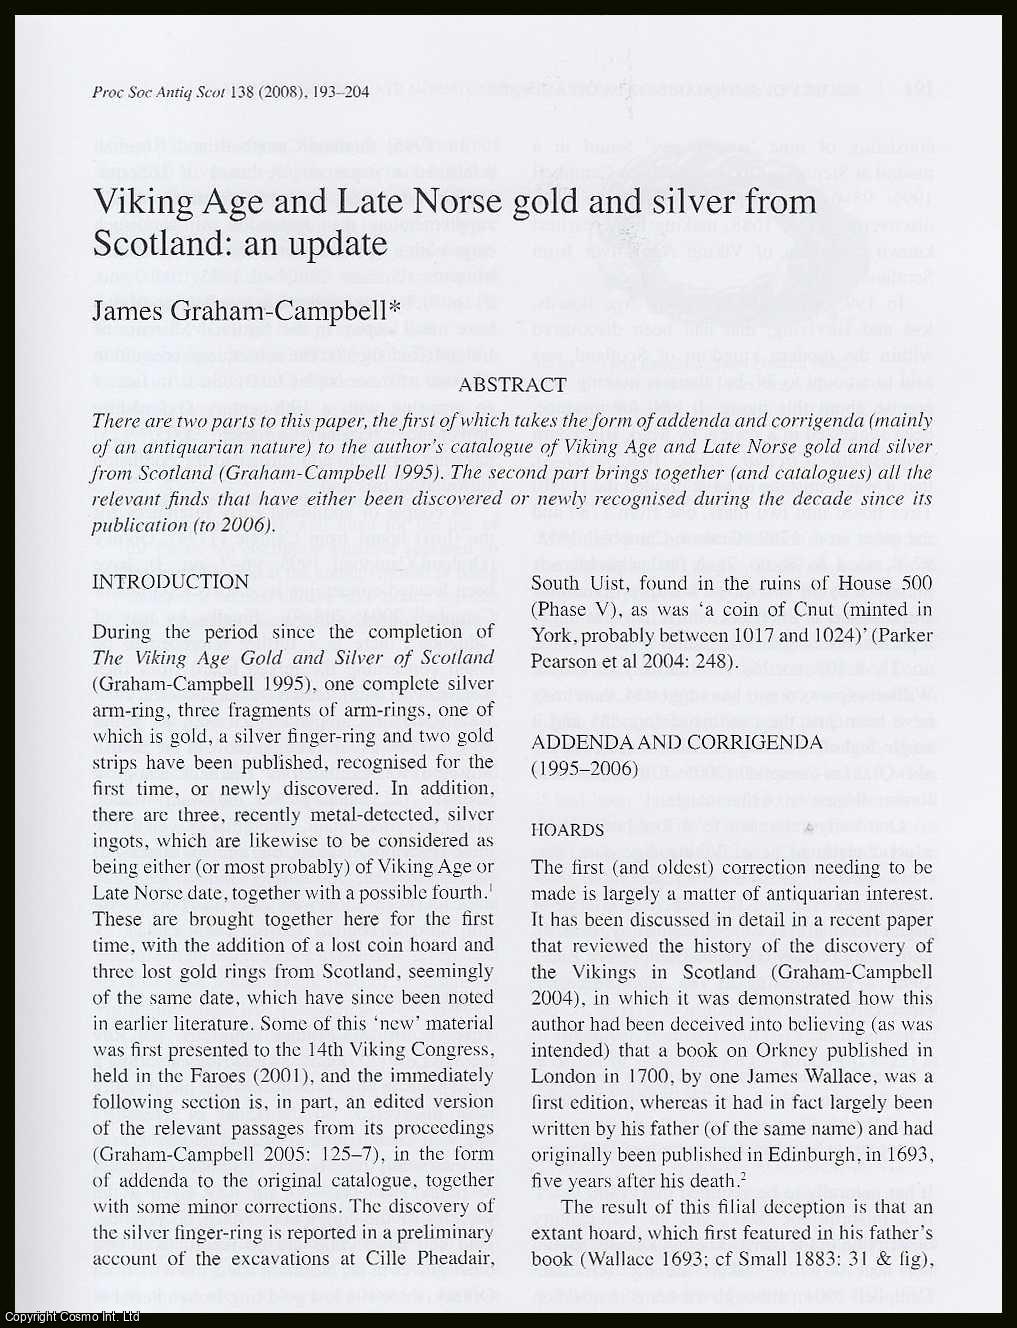 James Graham-Campbell - Viking Age and Late Norse Gold and Silver from Scotland: An Update.